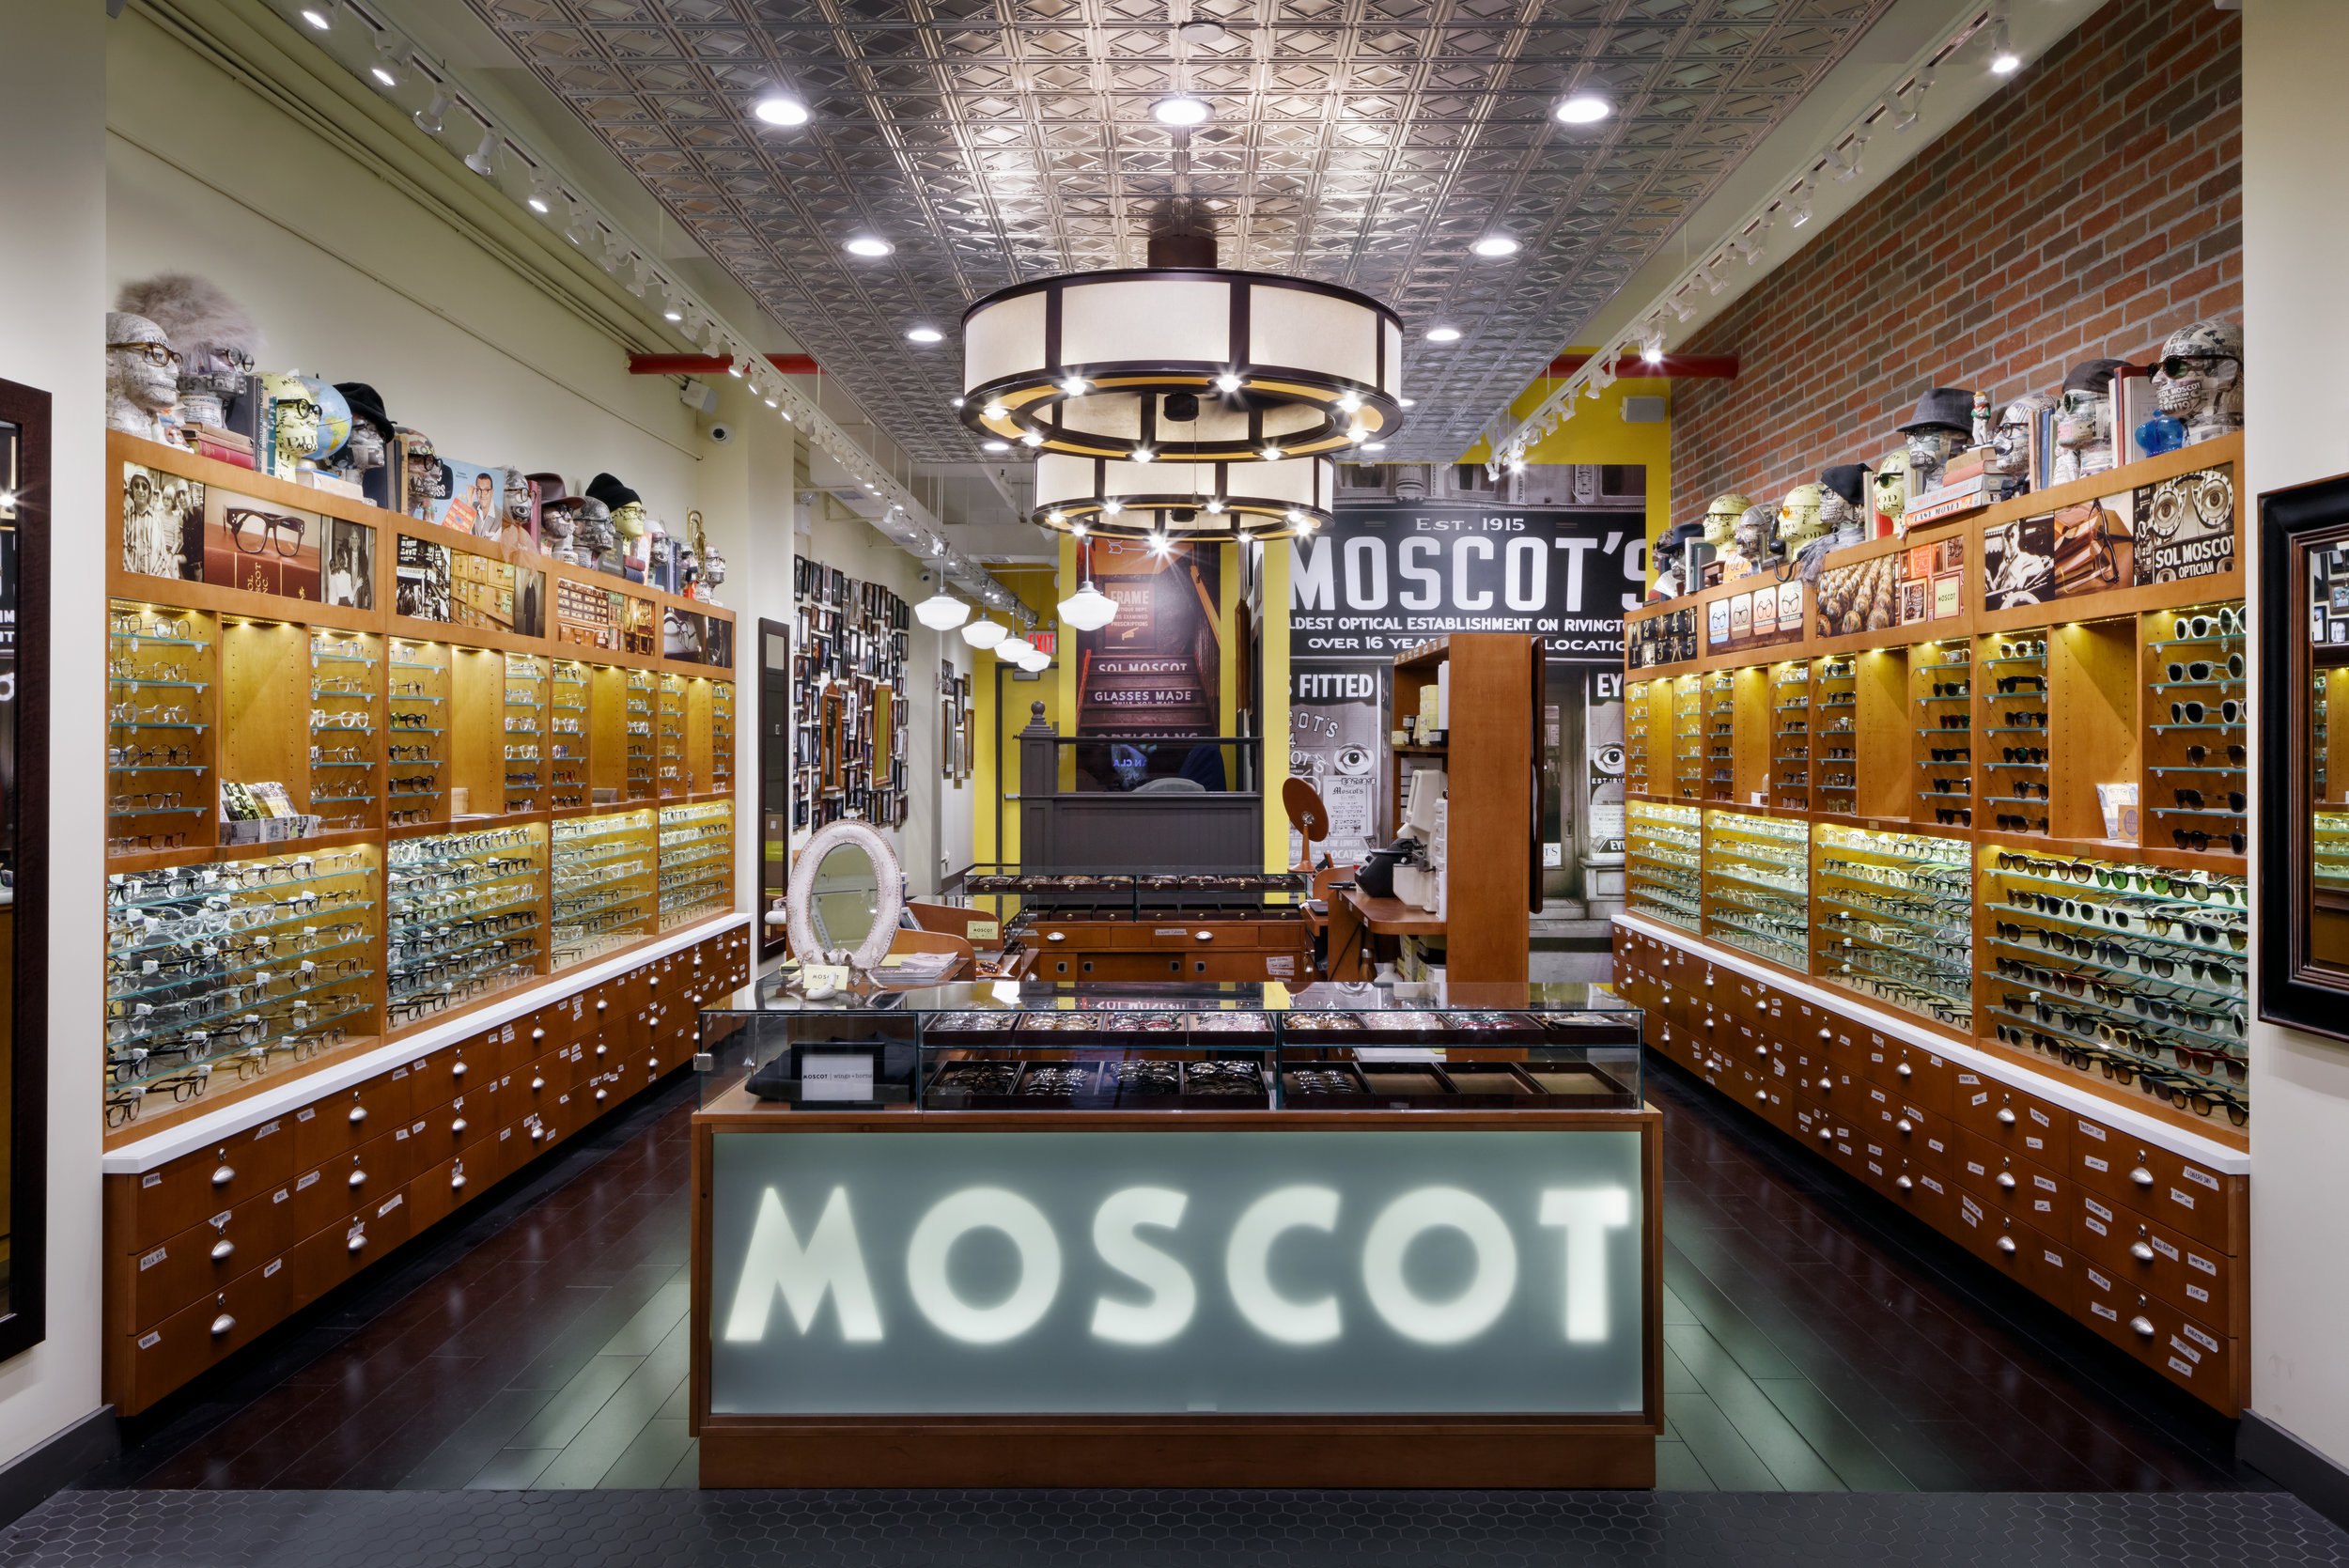 Moscot in Chelsea Market